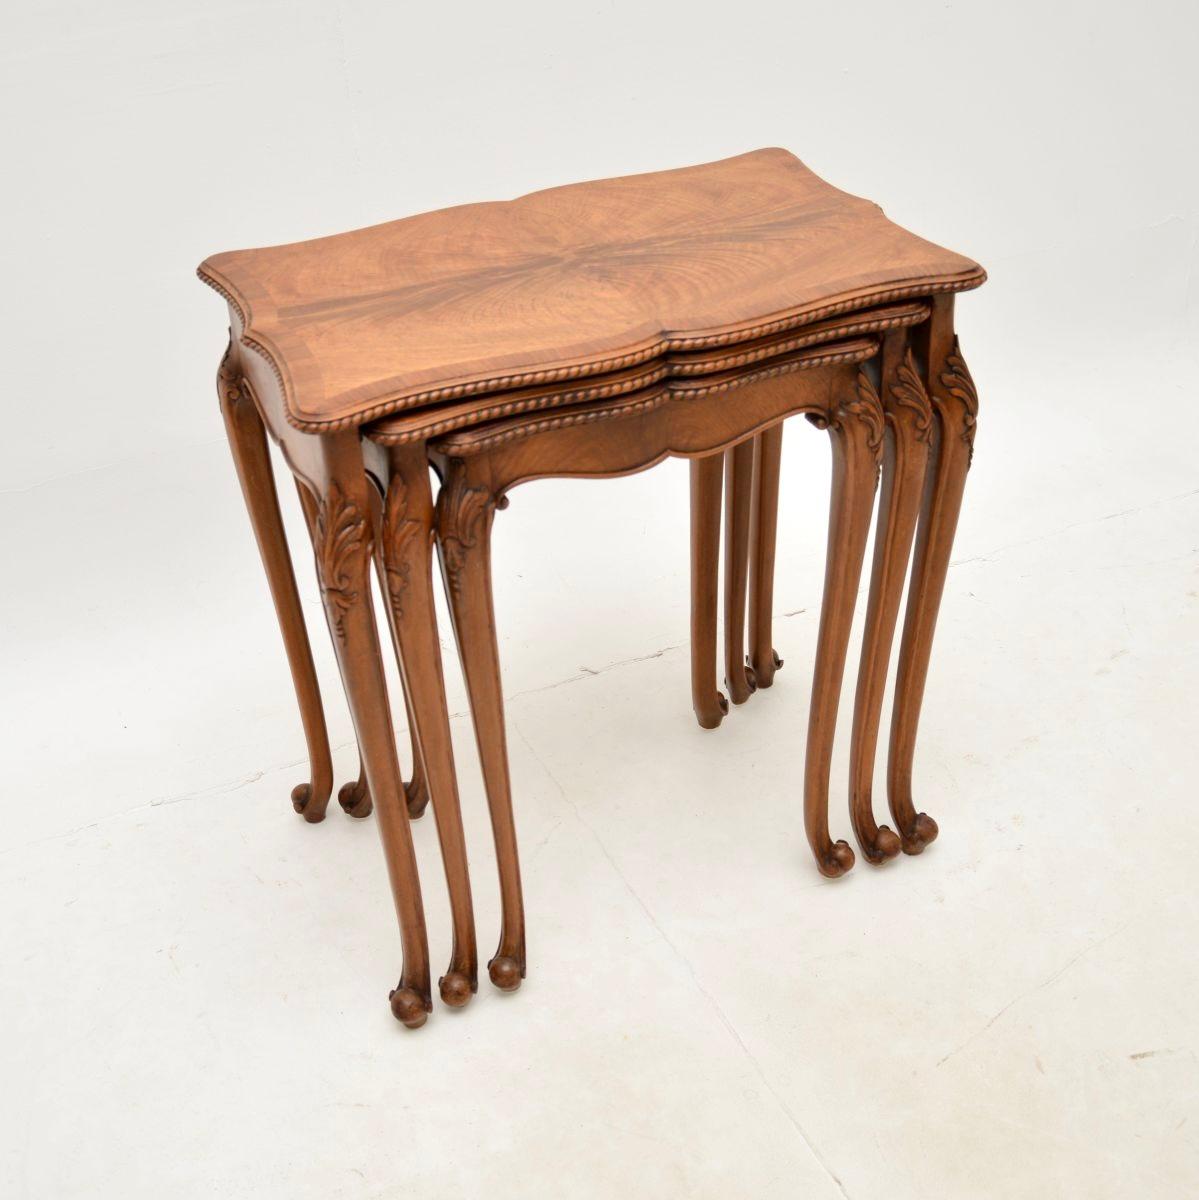 A beautifully made antique figured walnut nest of tables. This was made in England, it dates from around the 1930’s period.

The quality is superb, this has serpentine shaped edges with fine carving all around. It sits on elegant yet study cabriole